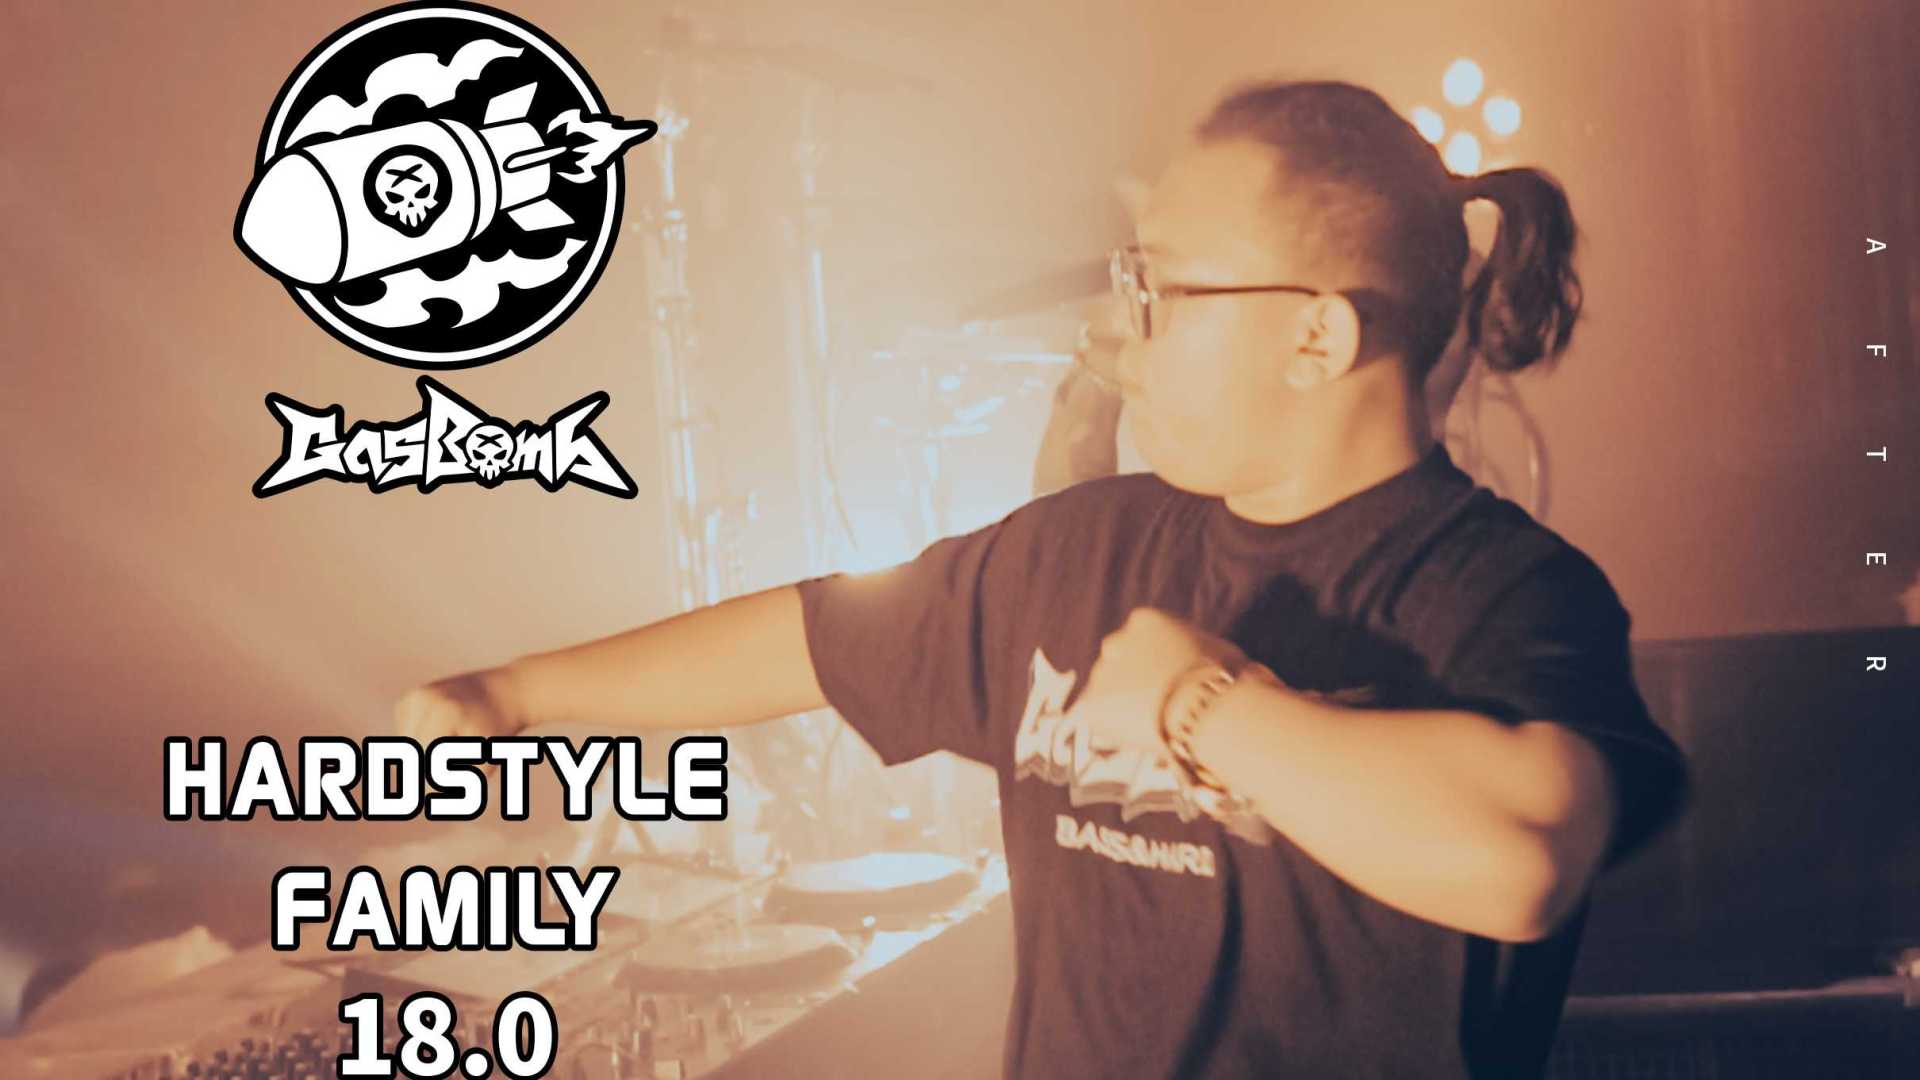 GasBomb | HardstyleFamily18.0 五彩缤纷 After